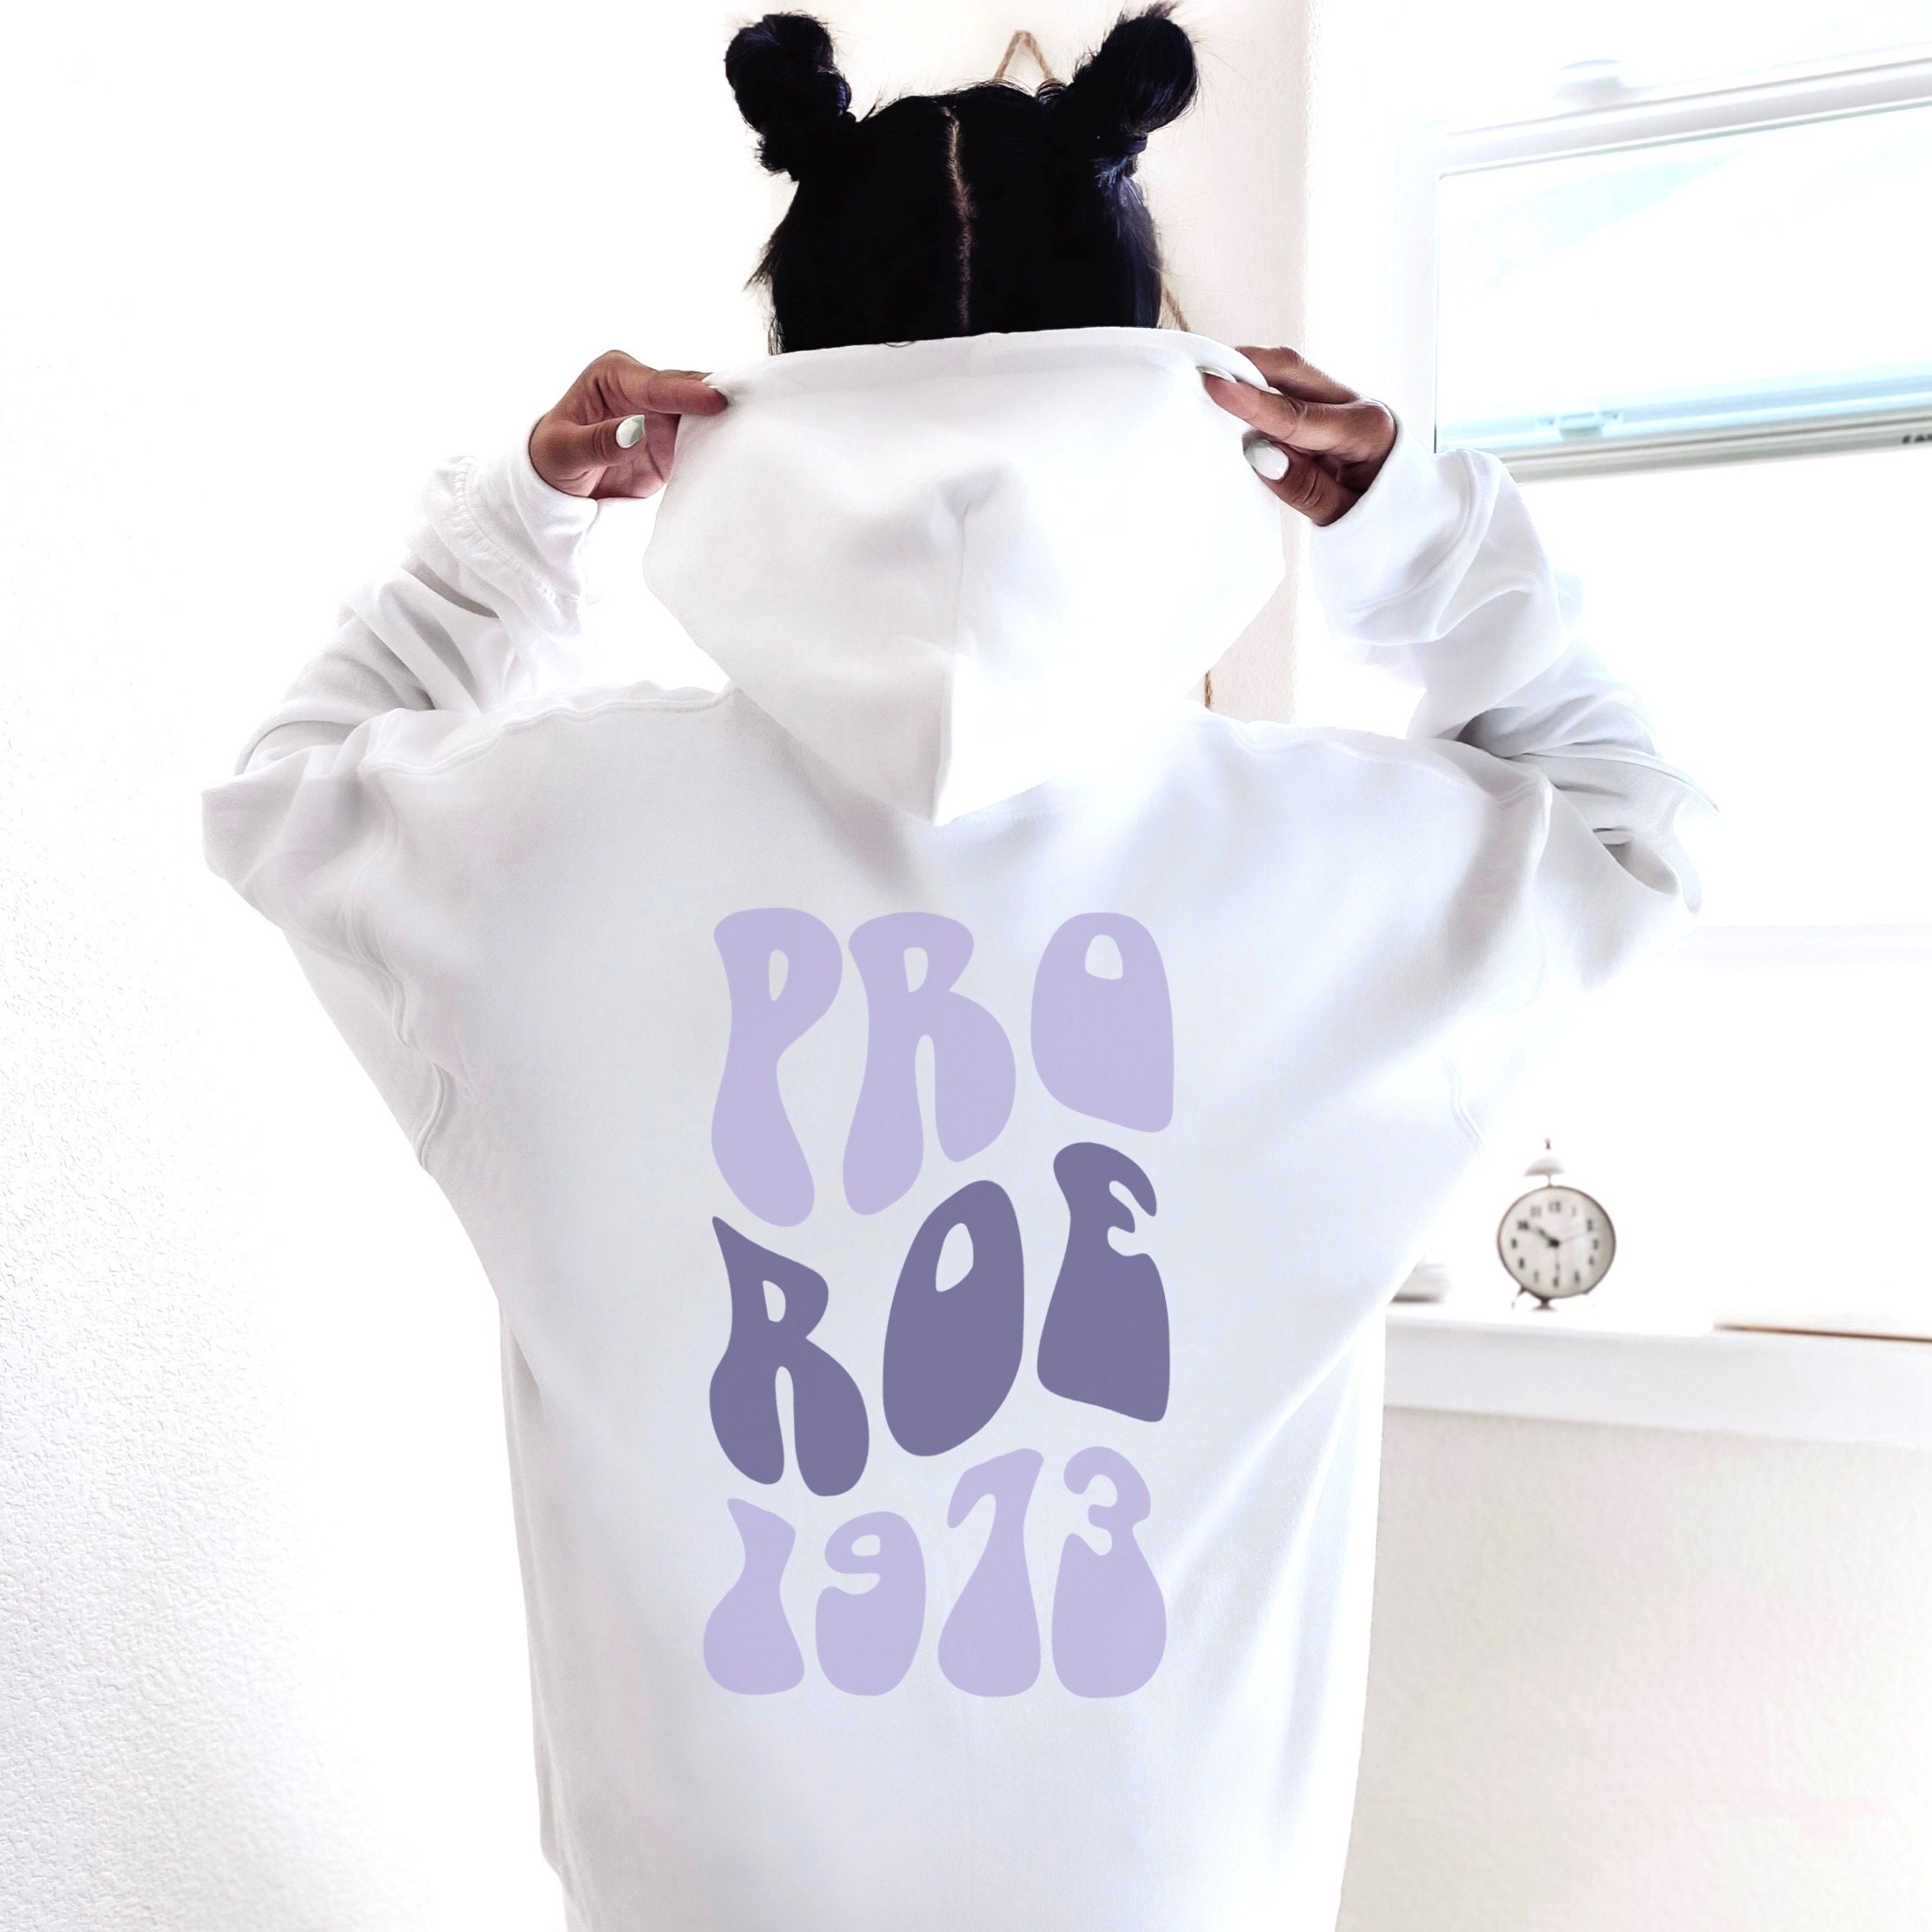  Protect Roe V Wade 1973, Abortion is Healthcare Dog Clothes  Hoodie Pet Pullover Sweatshirts Pet Apparel Costume for Medium and Large  Dogs Cats X-Large : Pet Supplies